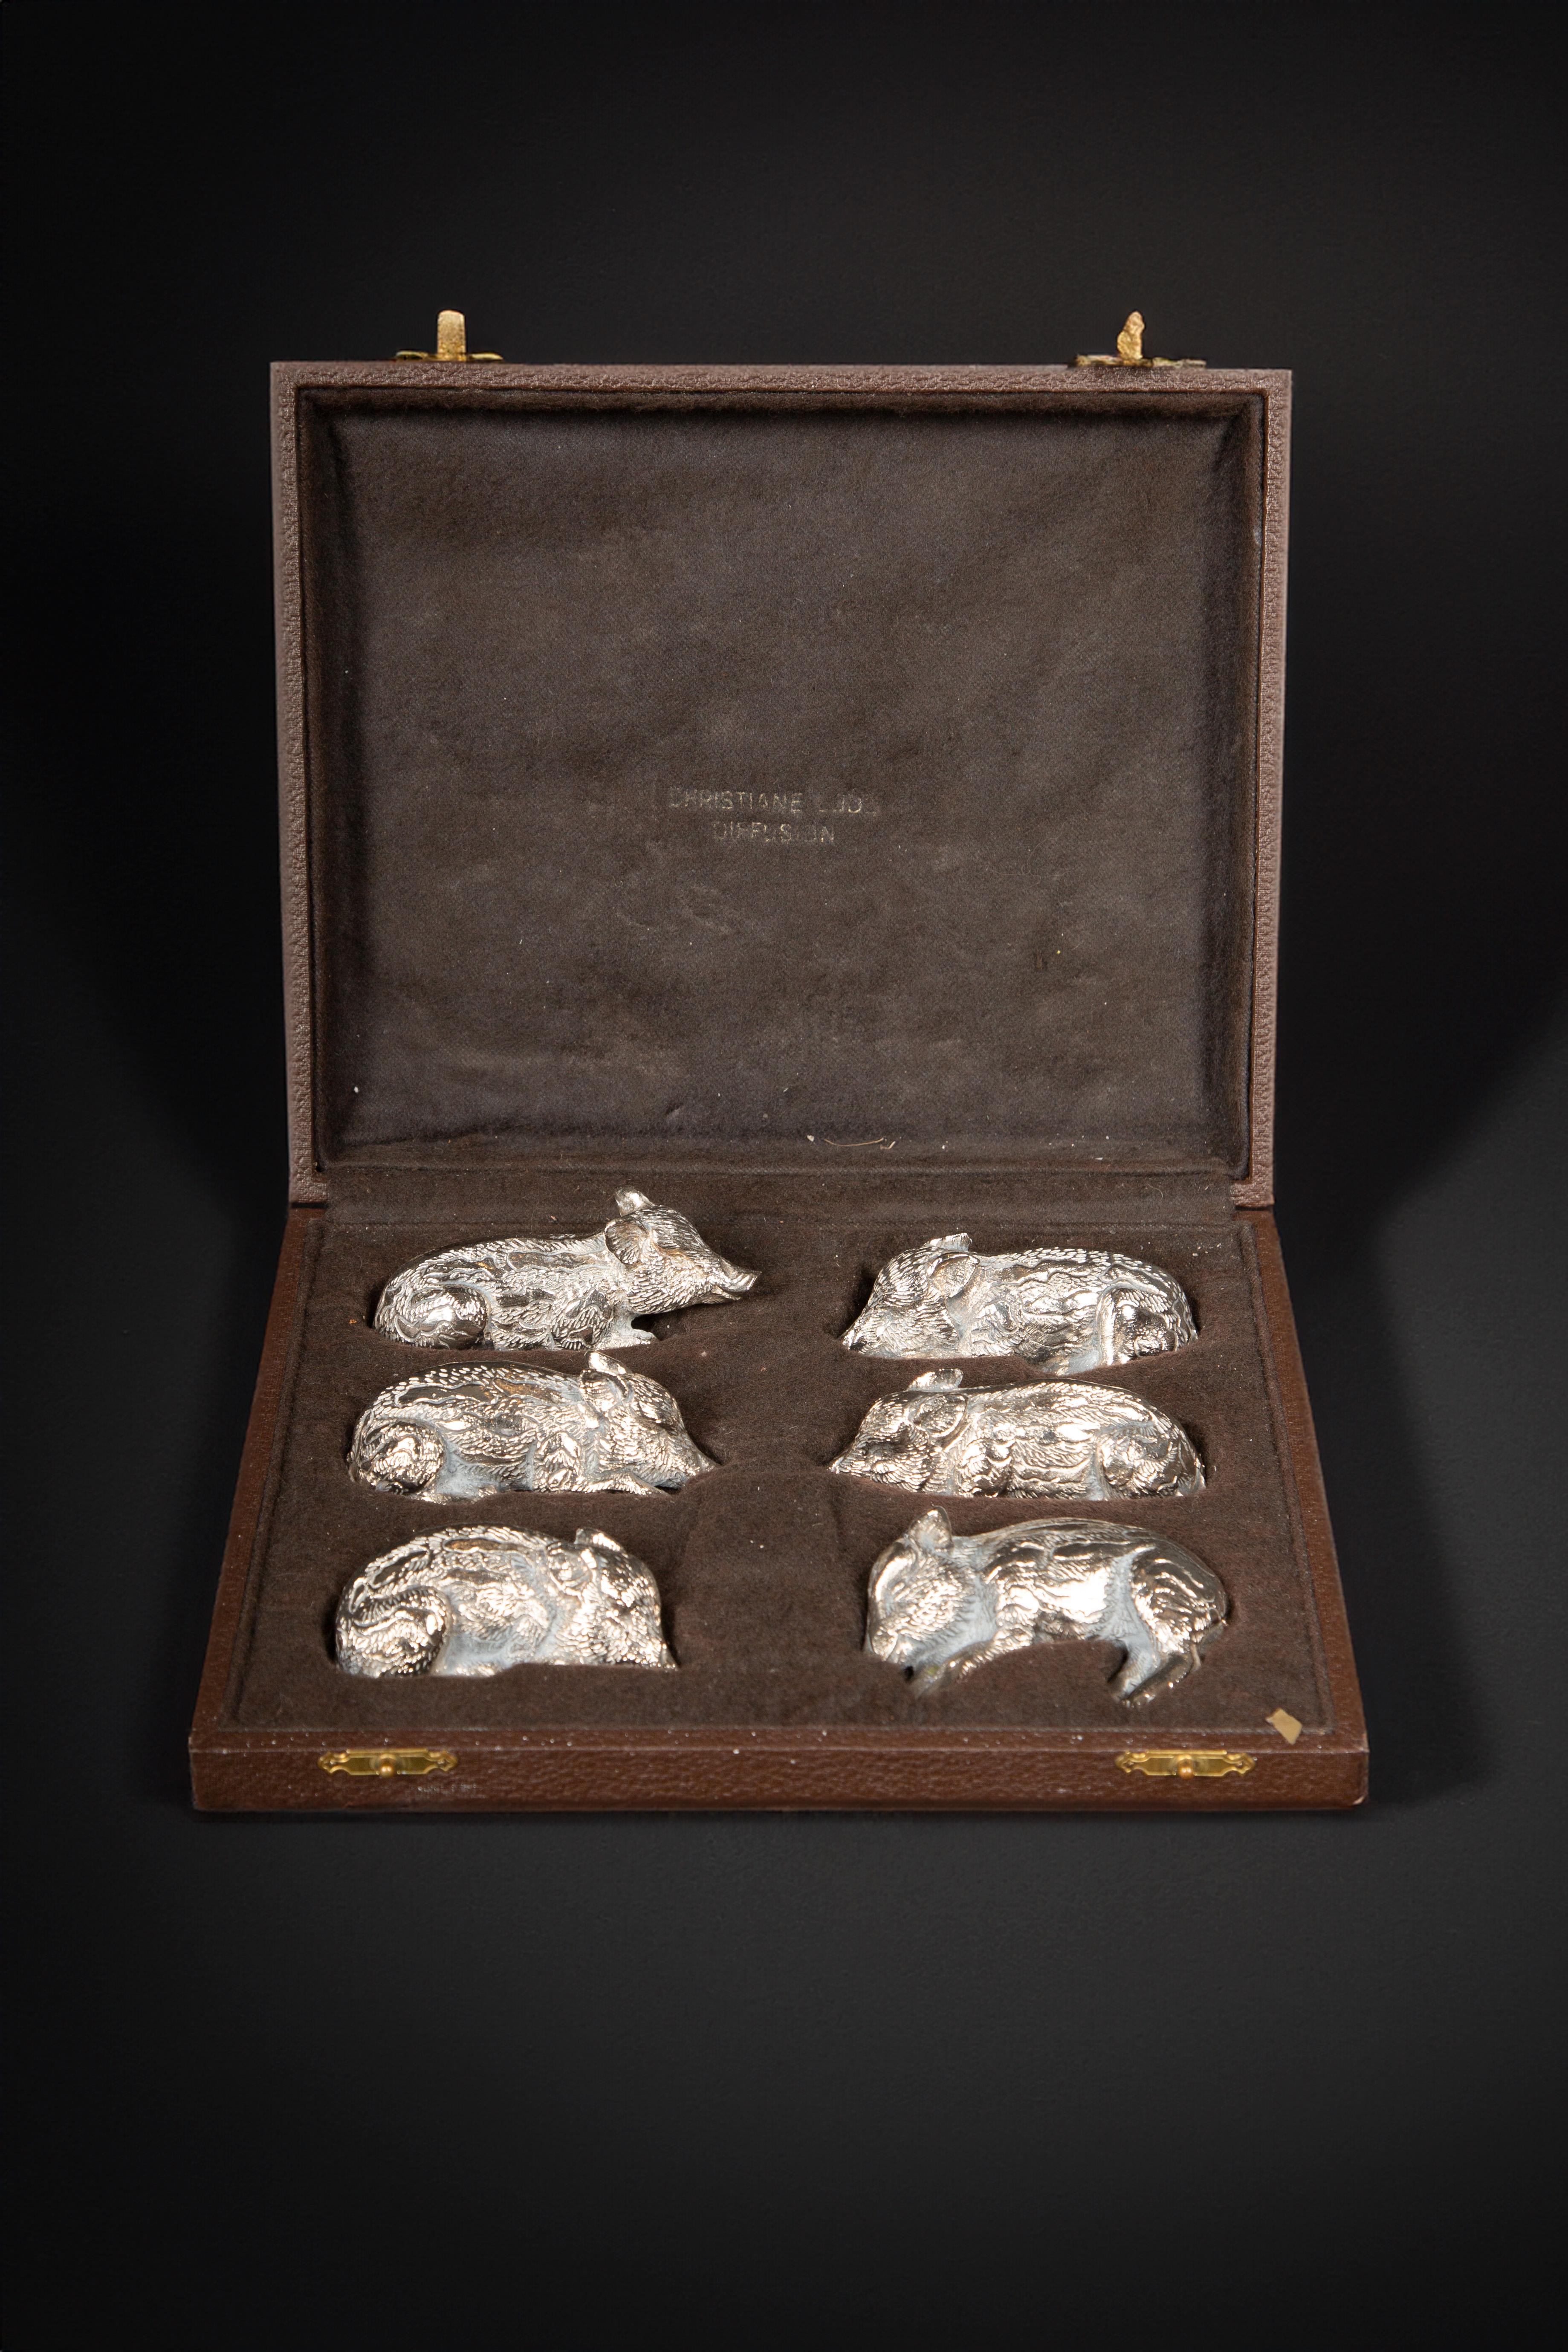 This set features six exquisite pewter pig knife rests crafted by the renowned Jean Maillard (1901-1993), known for his masterful animal sculptures. Each piece is nestled within a custom case, bearing the mark of exclusivity from 